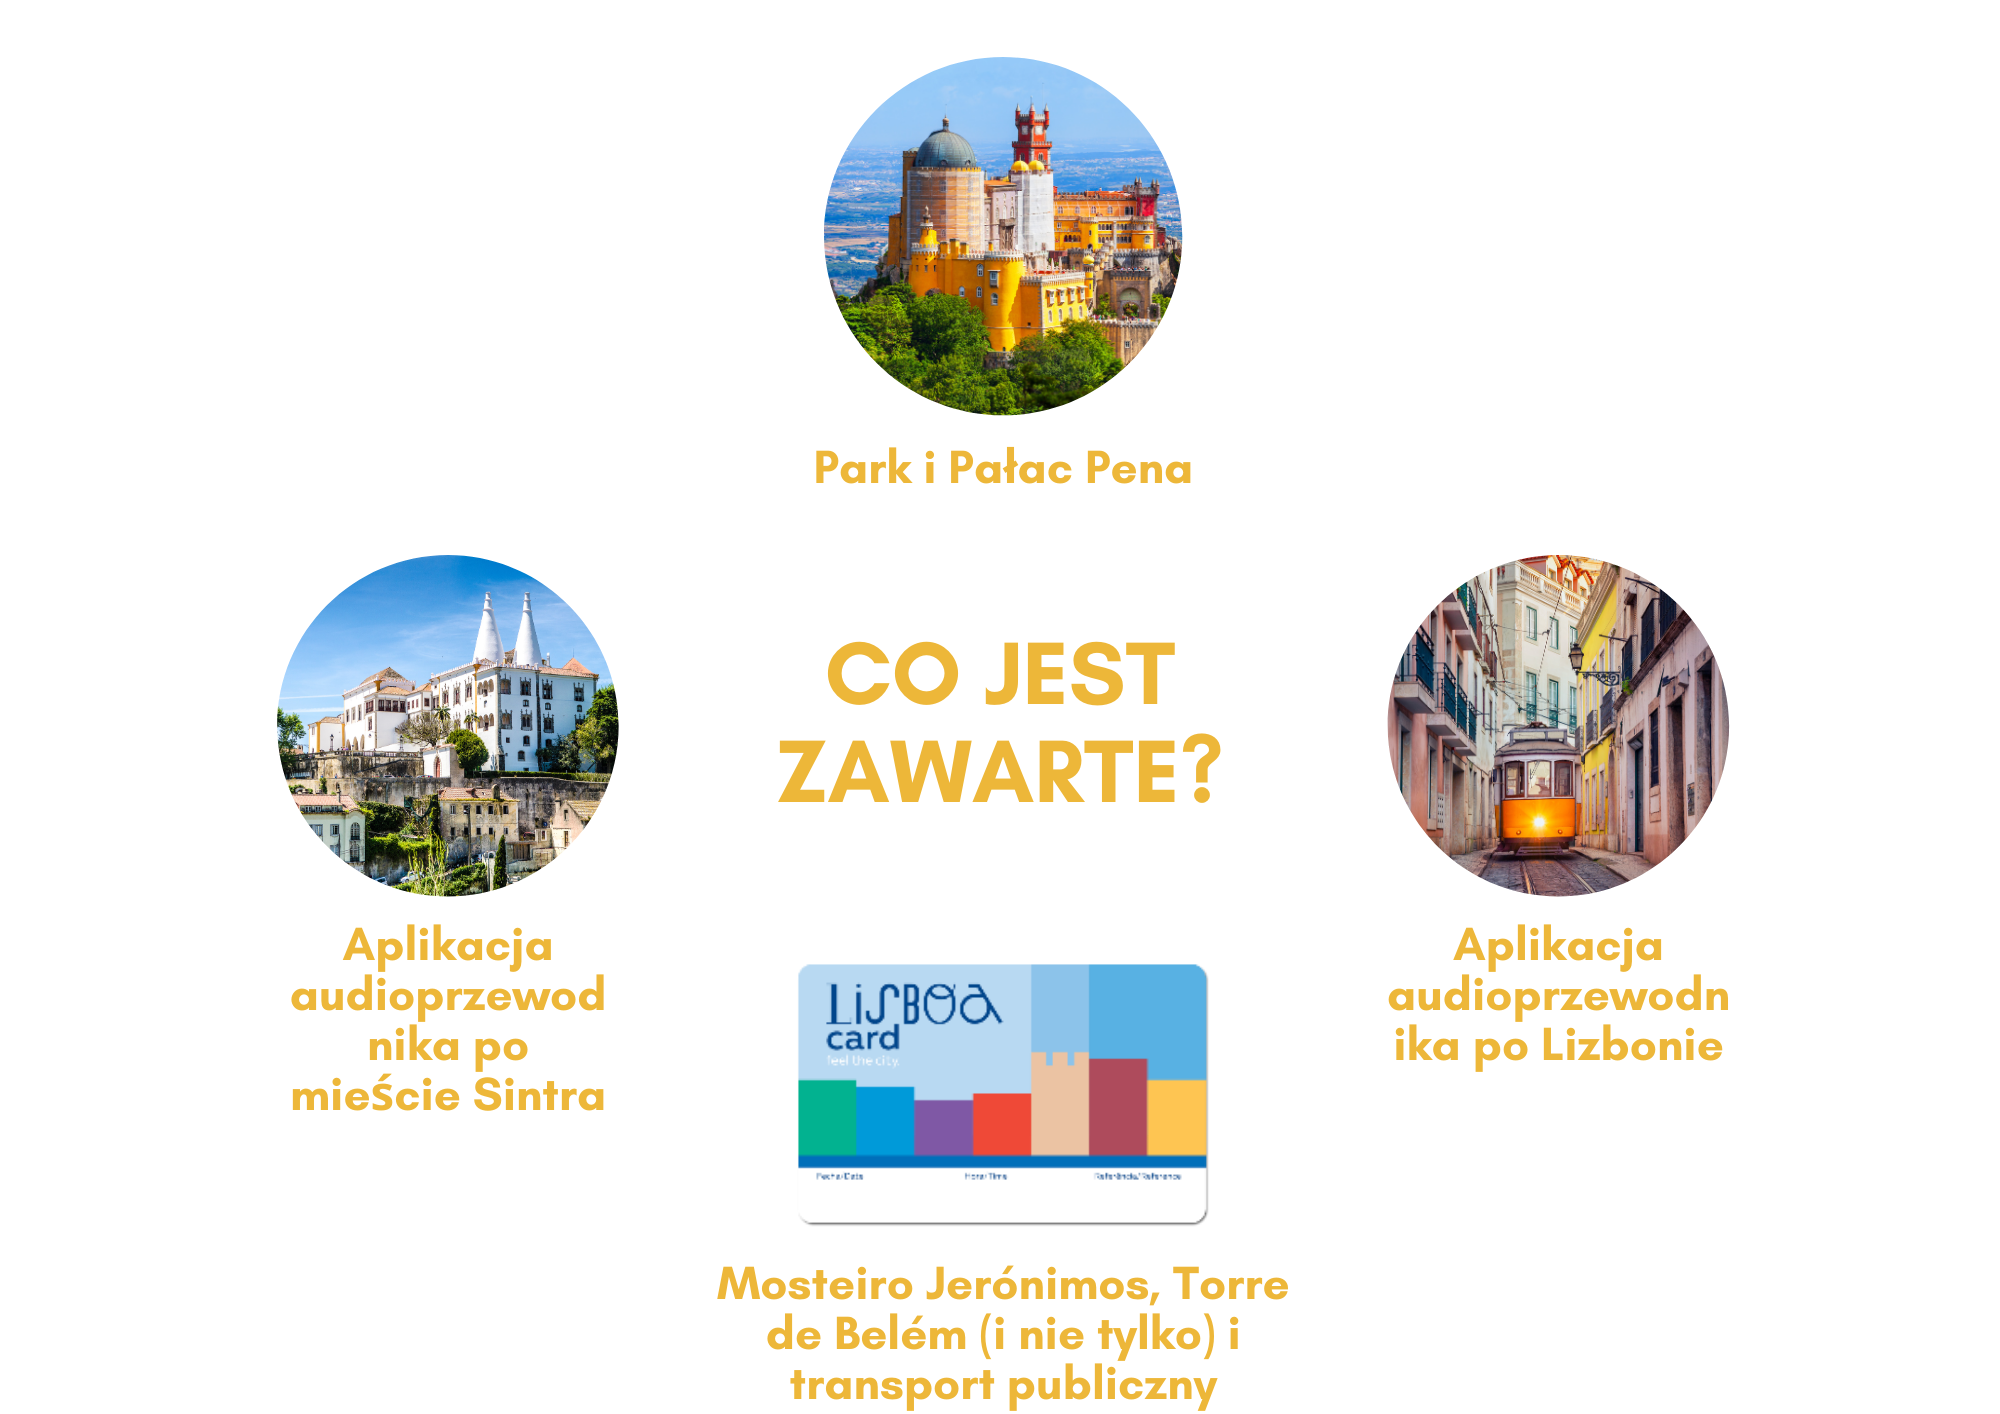 Lisboa Card + Pena Palace_what's included_PL